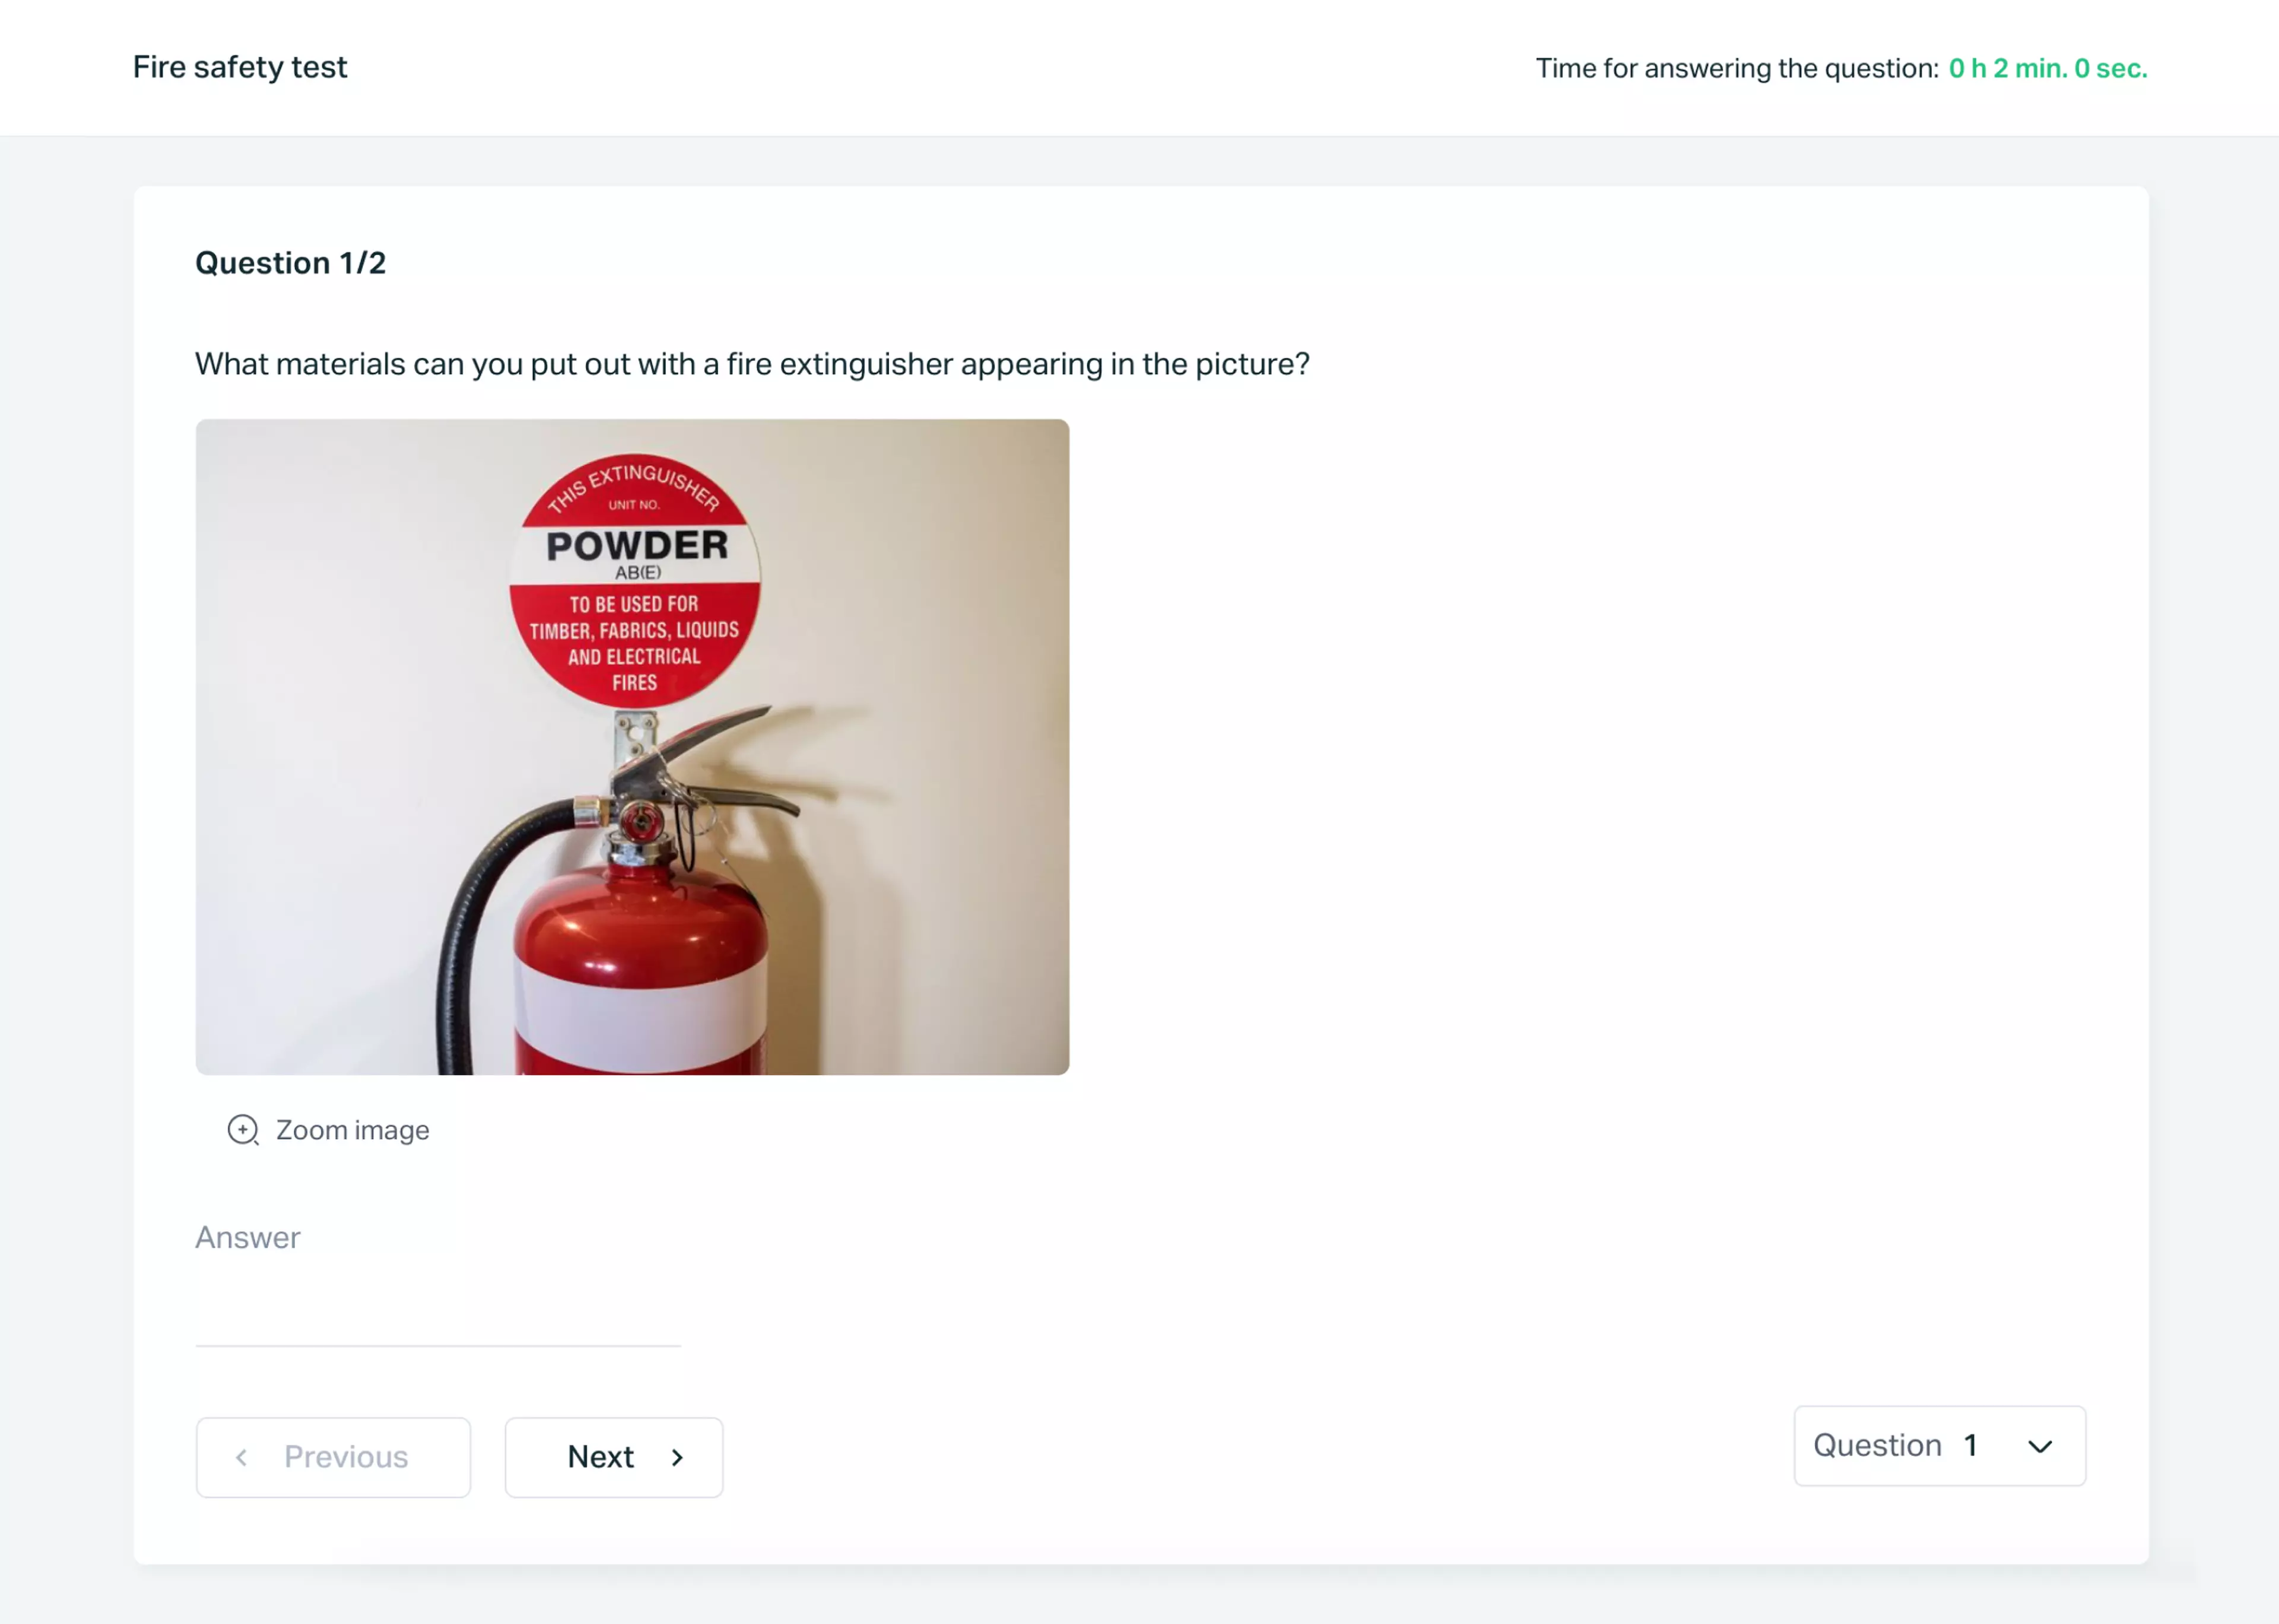 Testportal online quiz question with an image of a fire extinguisher.